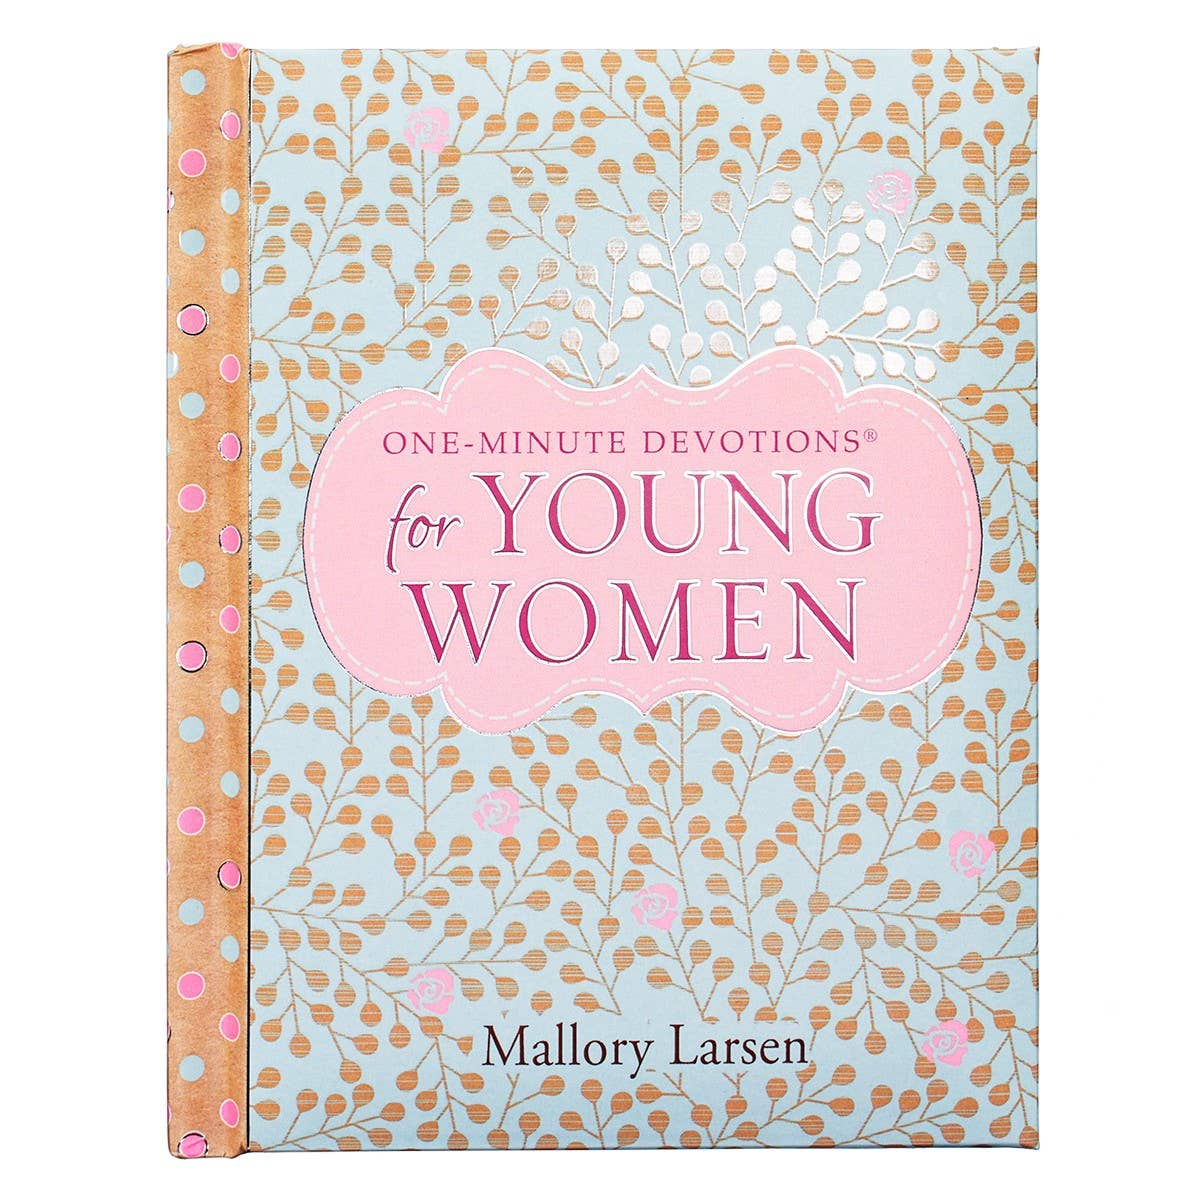 One-Minute Devotions for Young Women